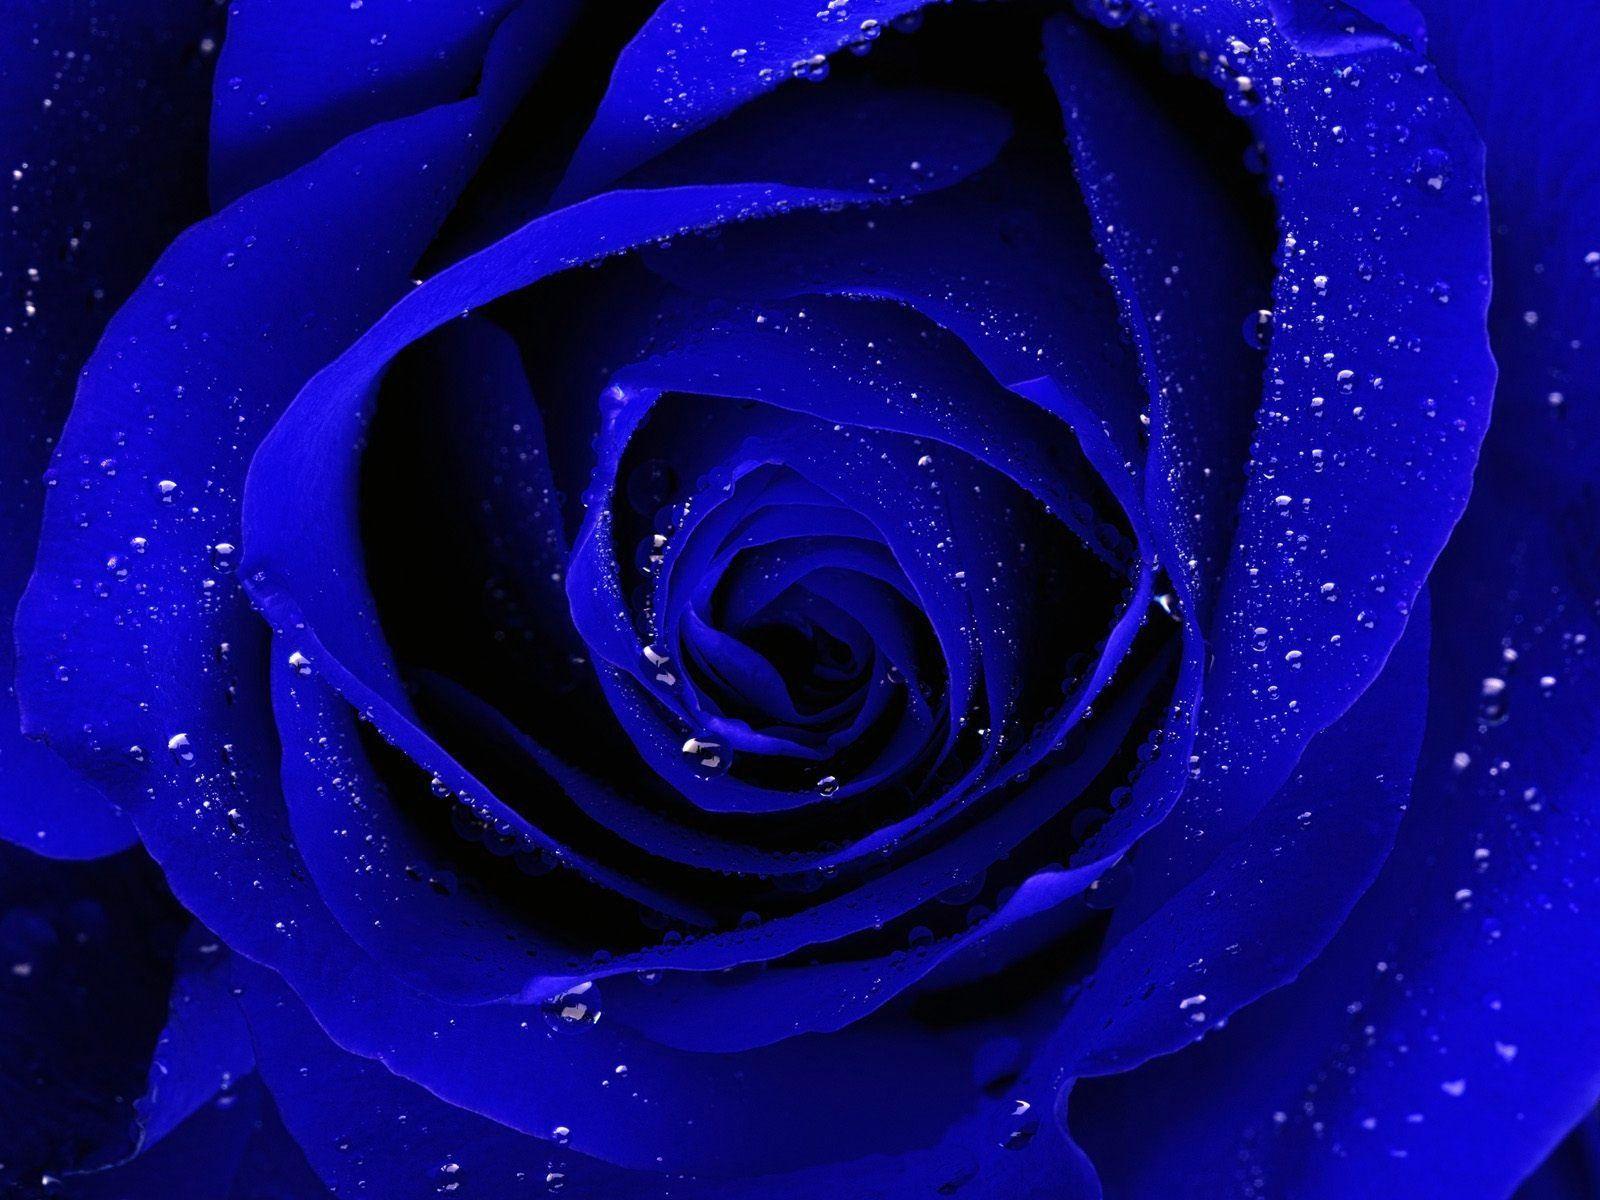 Blue Flowers Wallpapers - Wallpaper Cave